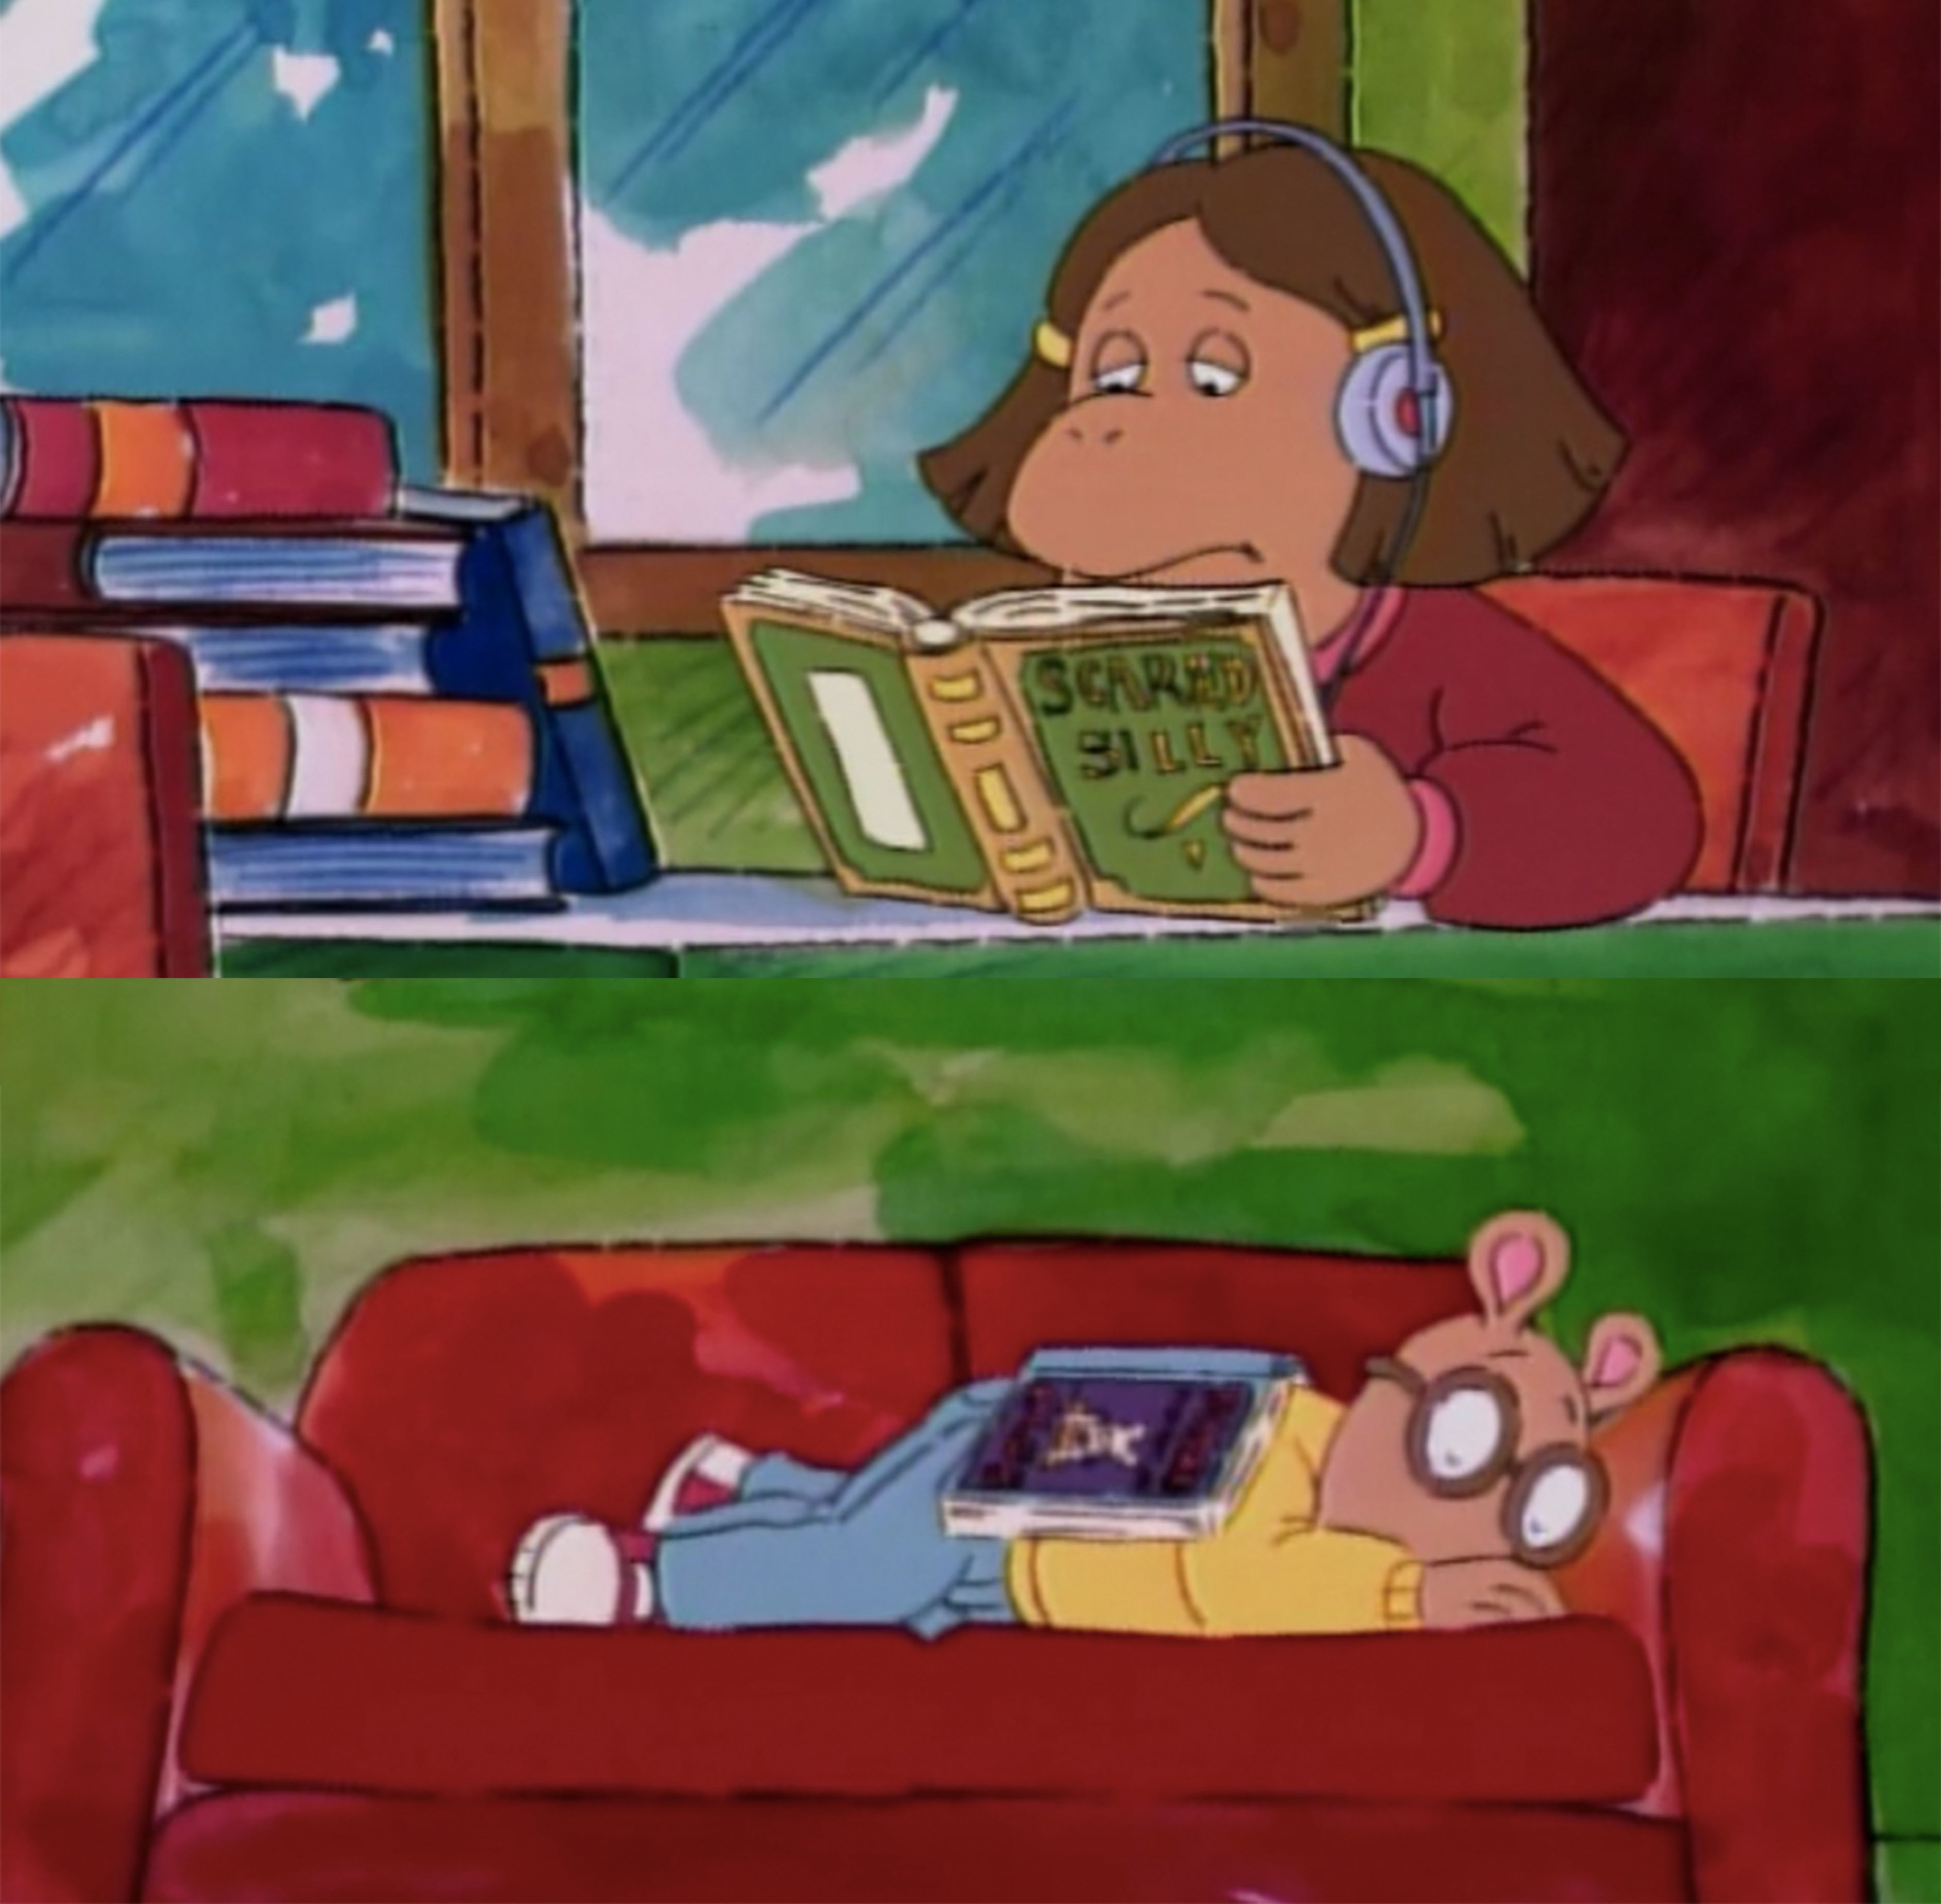 Francine reading unrelated novel looking bored with headphones, Arthur sleeping on couch